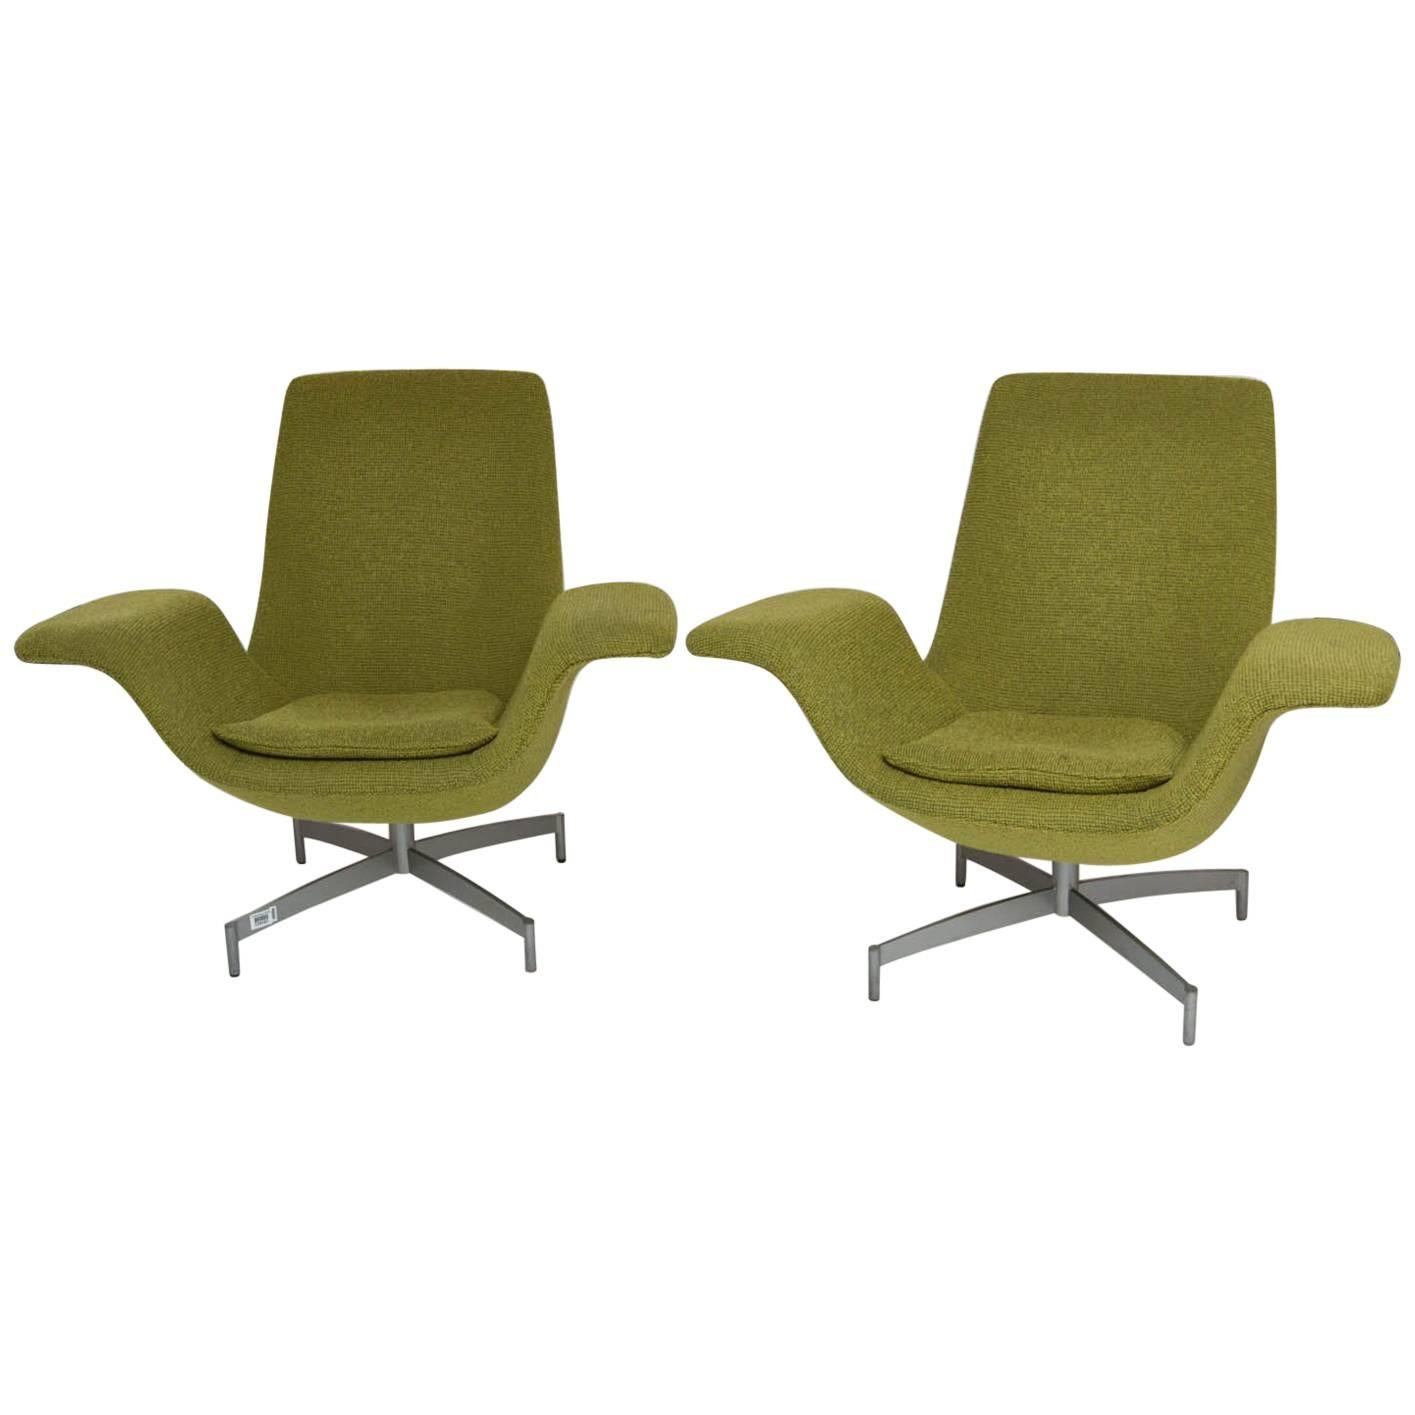 Pair of Hbf Furniture Dialogue Lounge Chairs